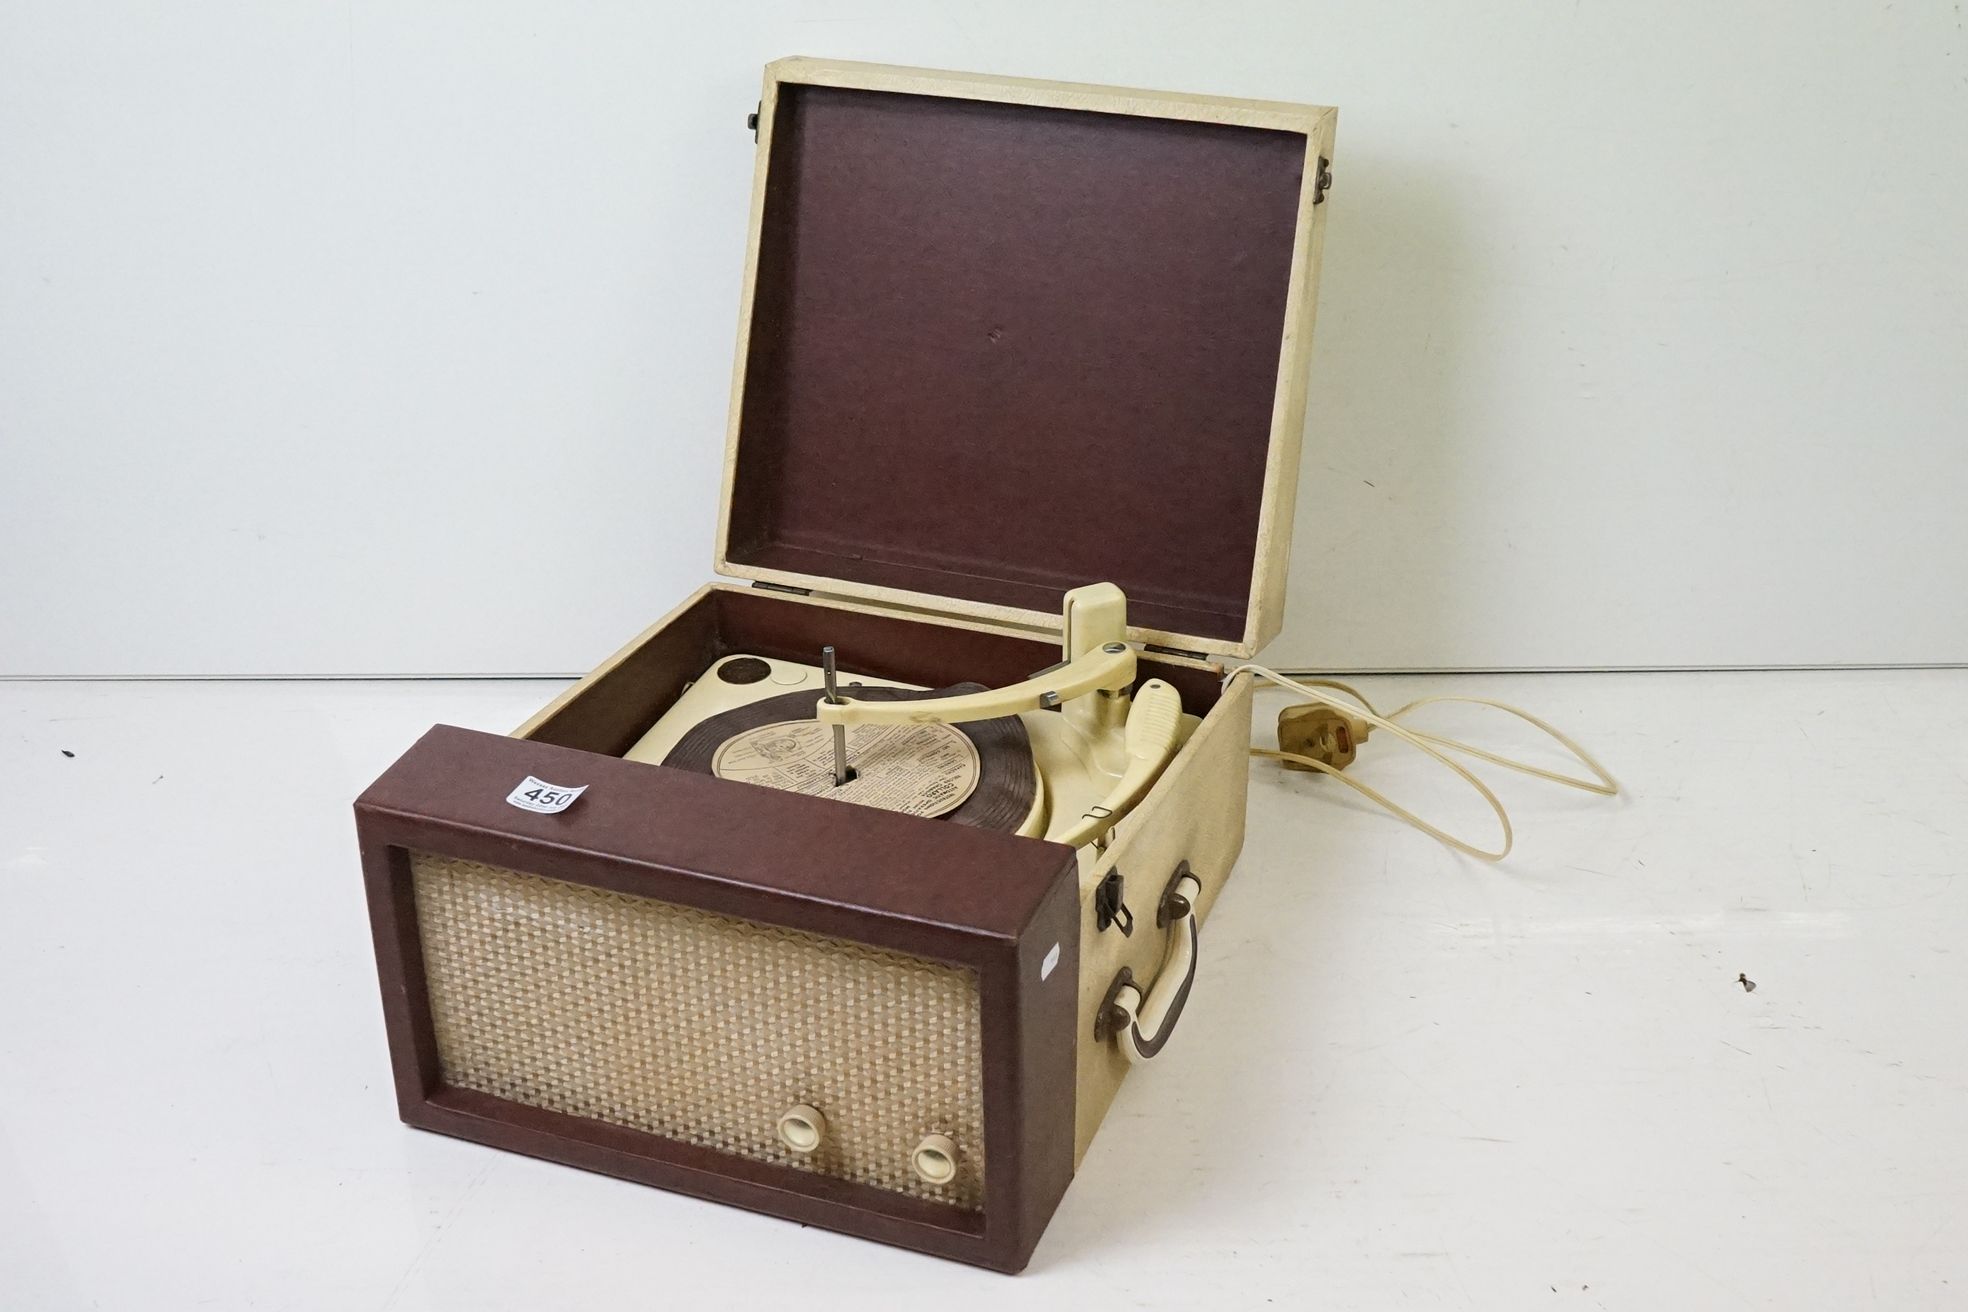 Collaro high fidelity portable record player set within a red and white faux leather case.